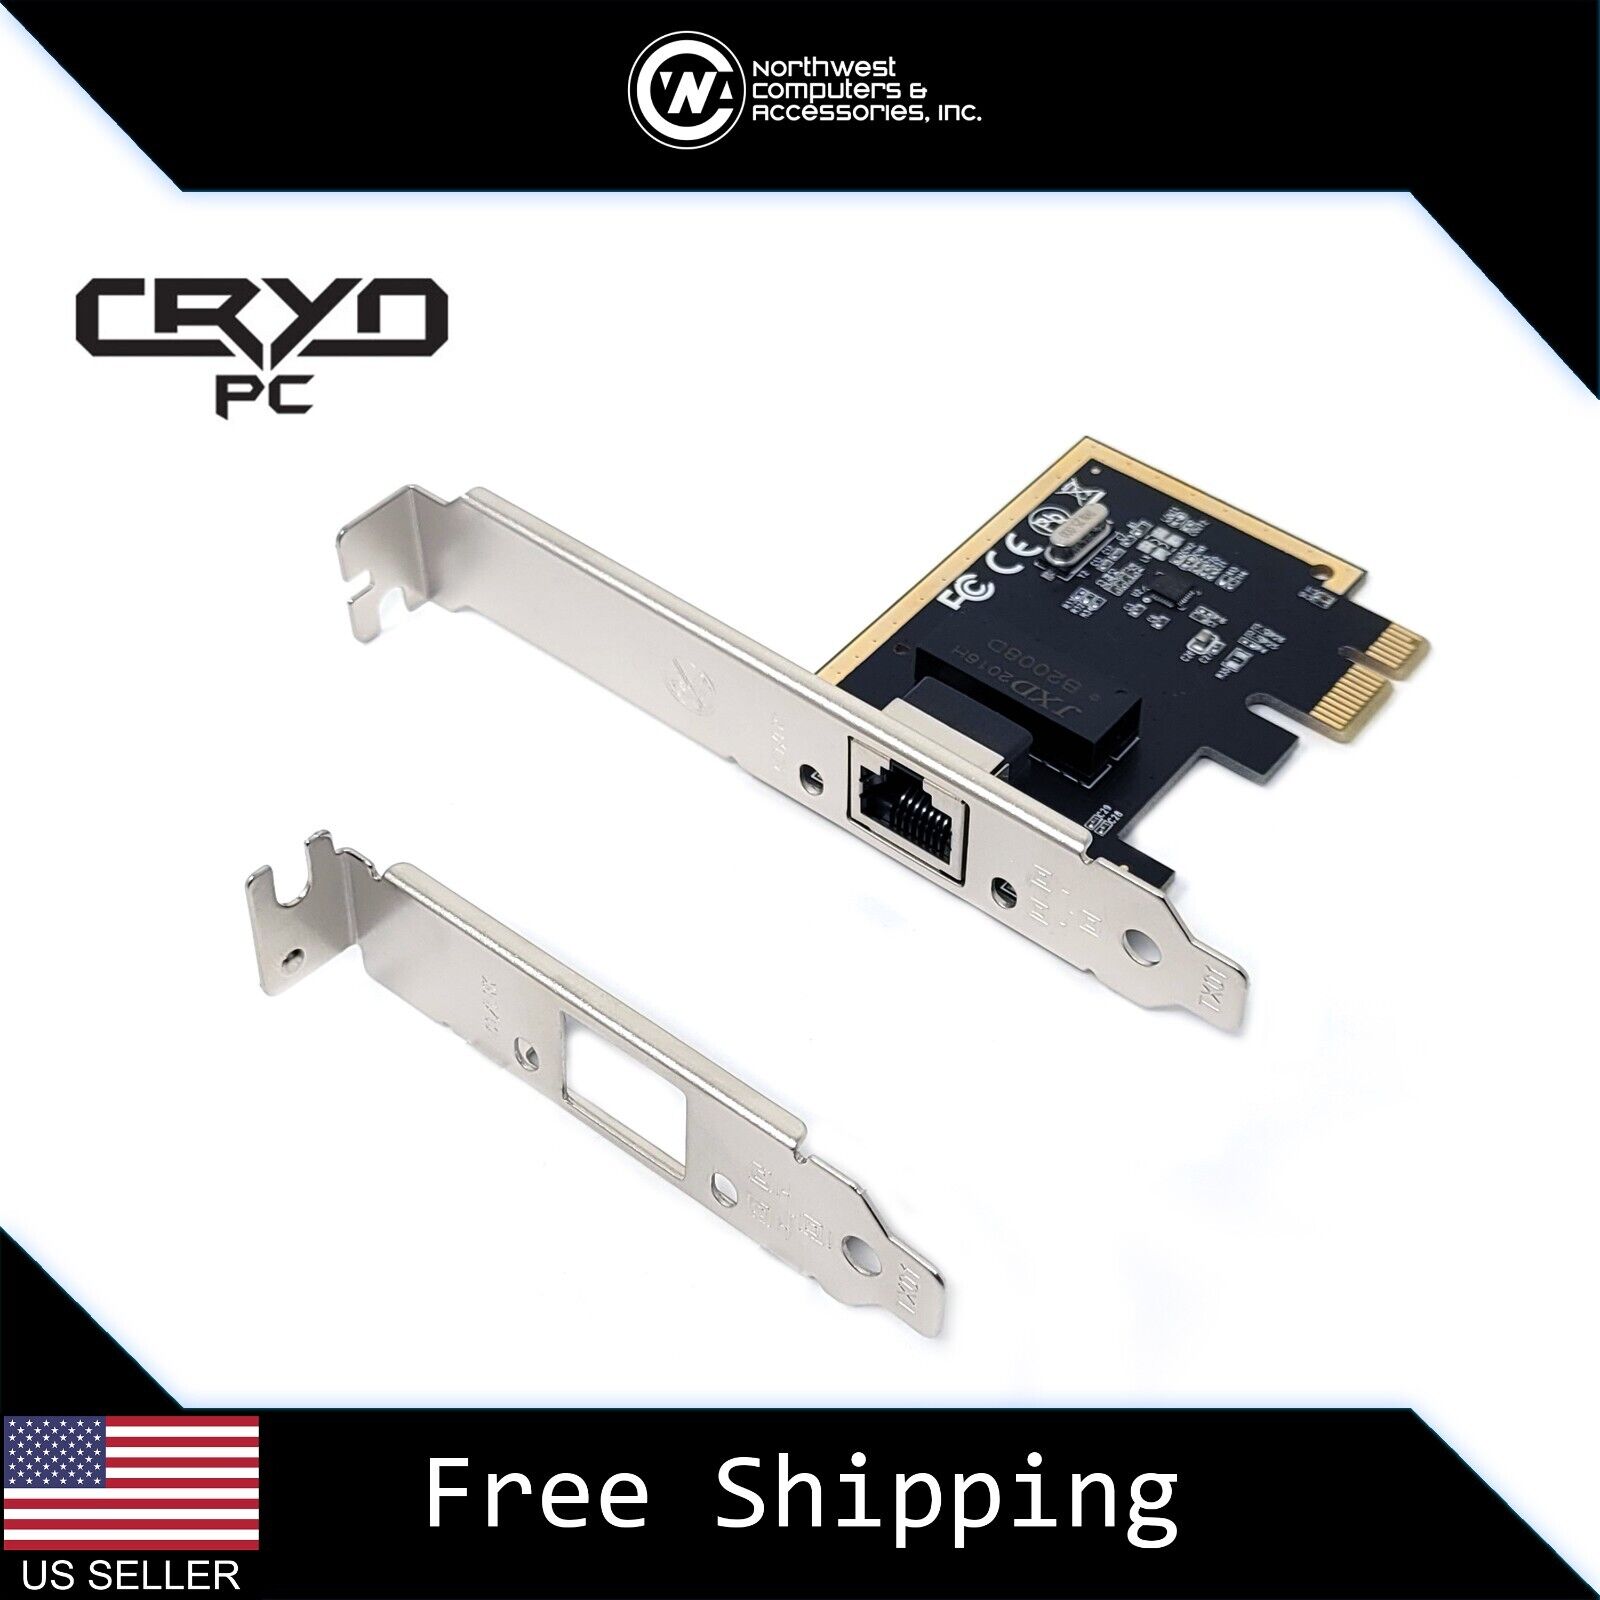 Cryo-PC PCIe Gigabit Network Adapter Card, Low Profile Bracket 10/100/1000 Mbps